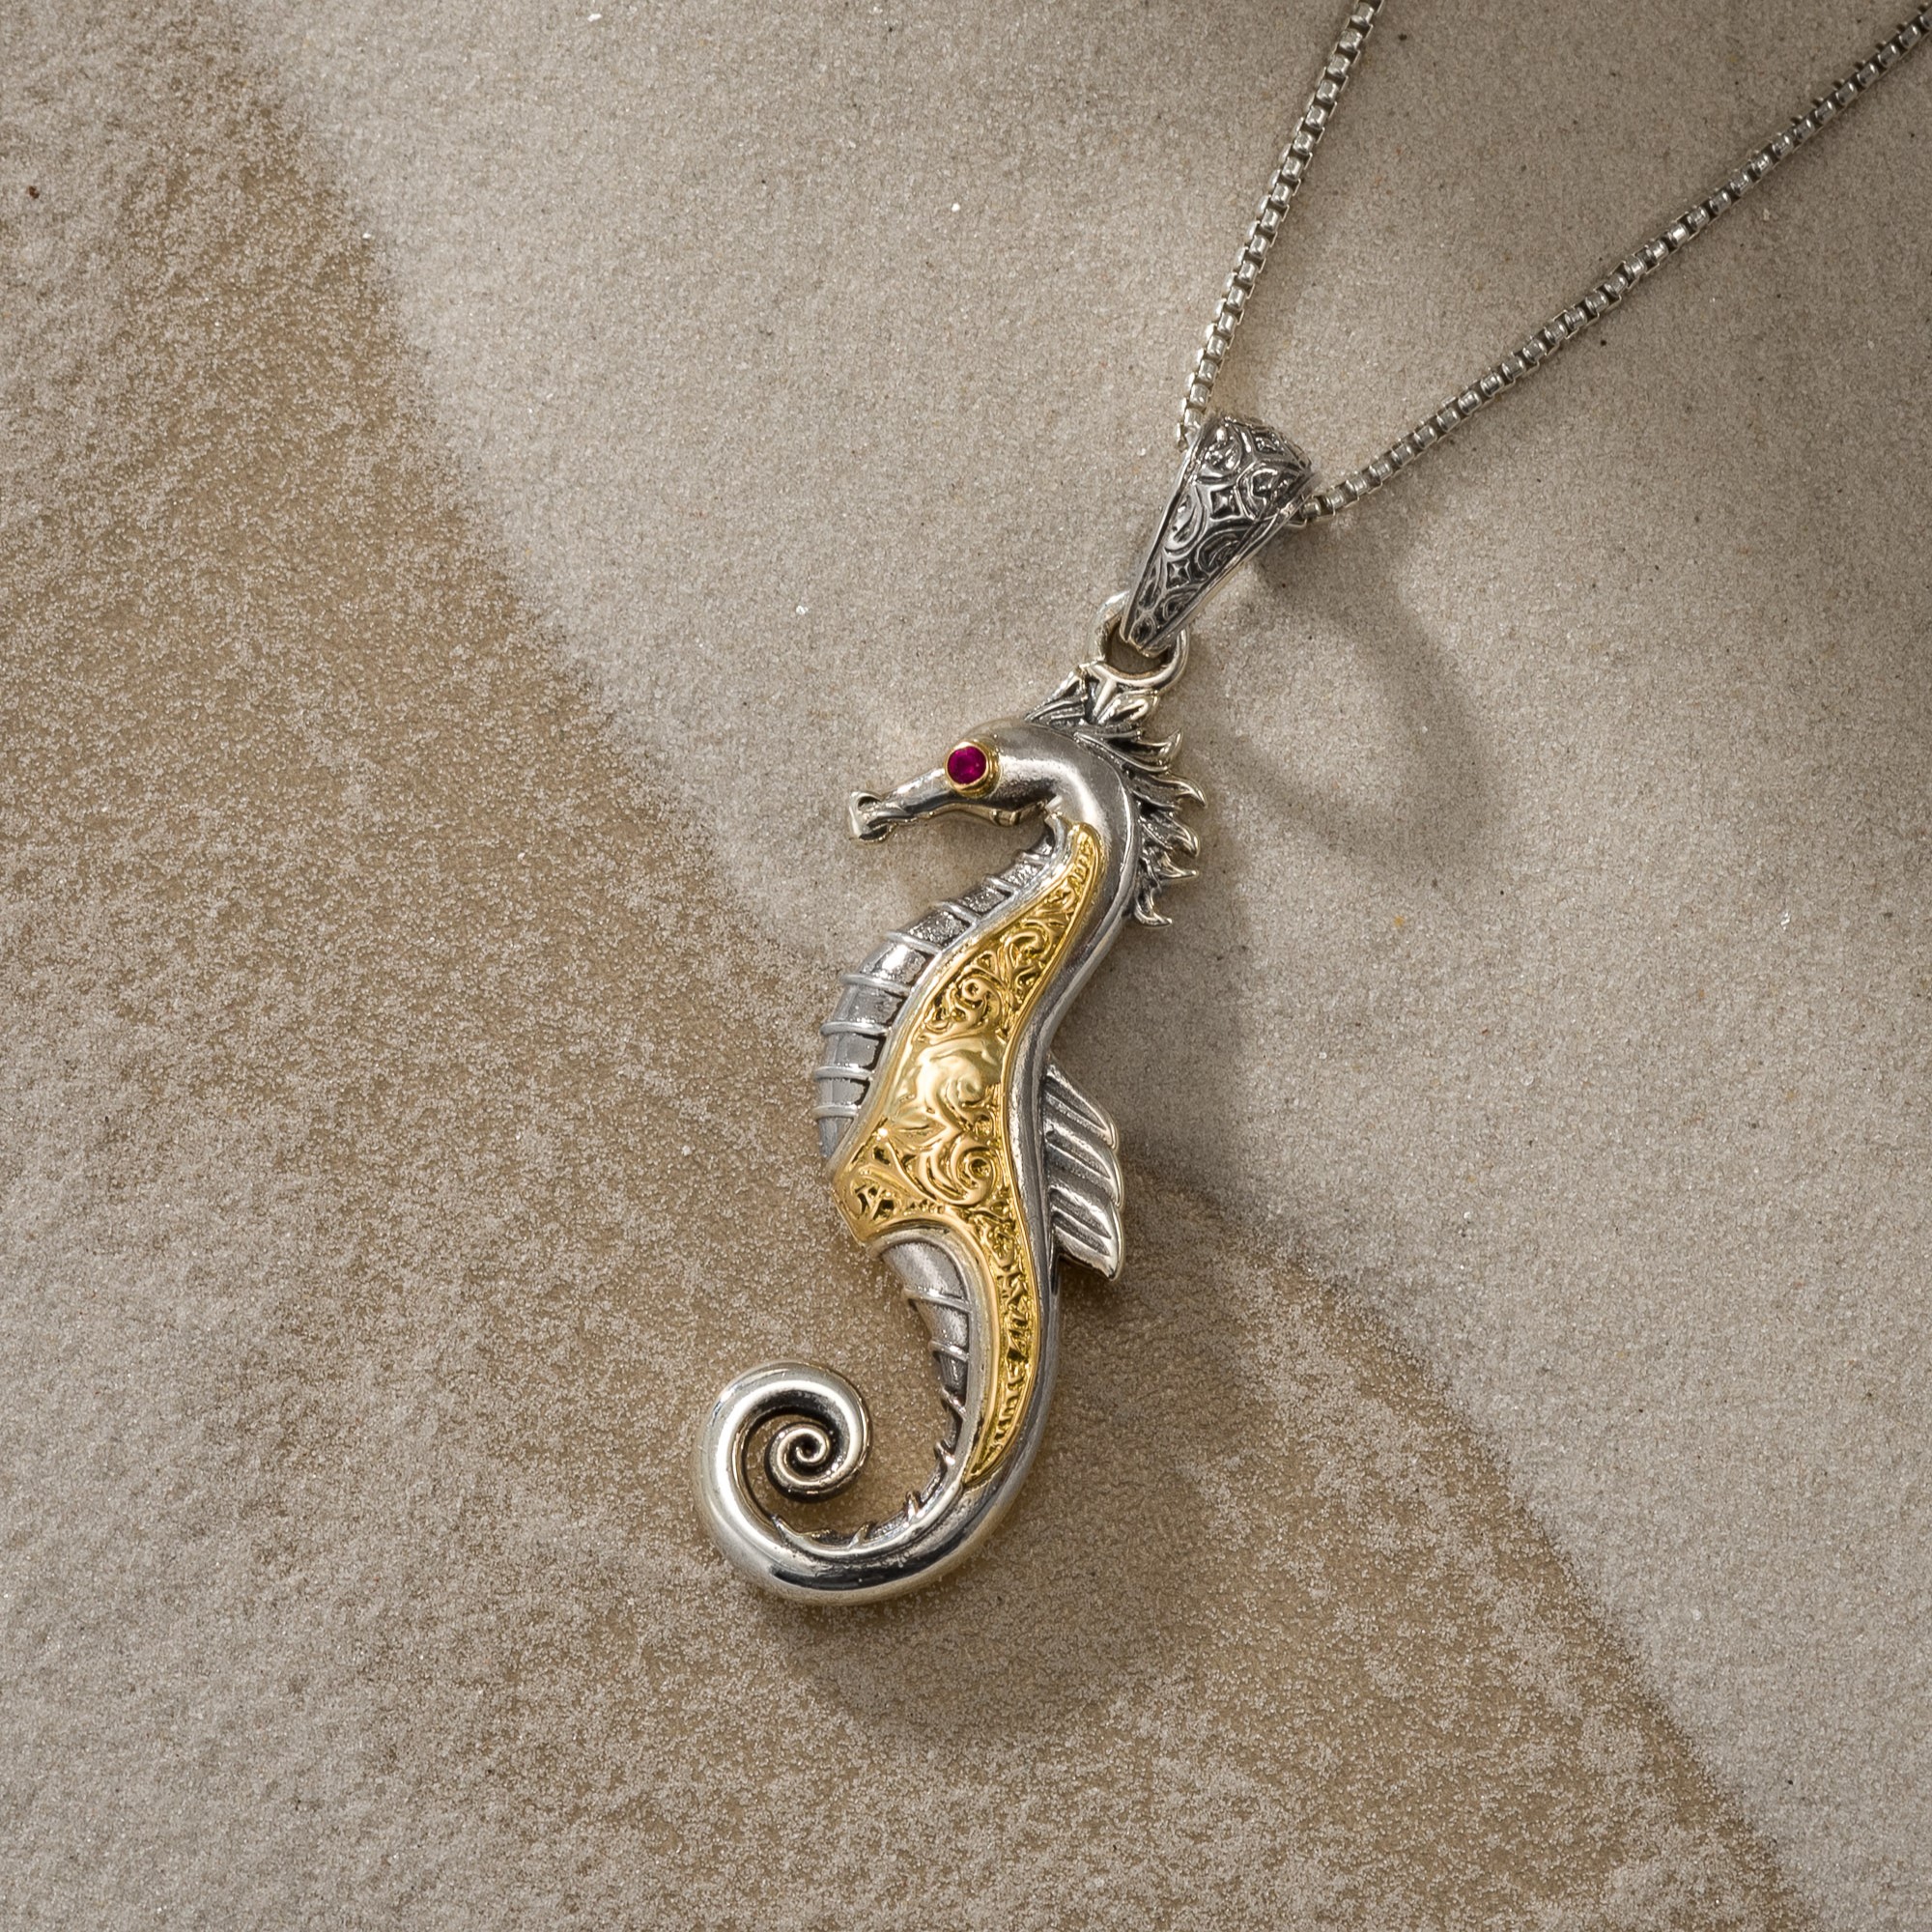 Sea Horse Pendant in 18K Gold and Sterling Silver with Precious Stones